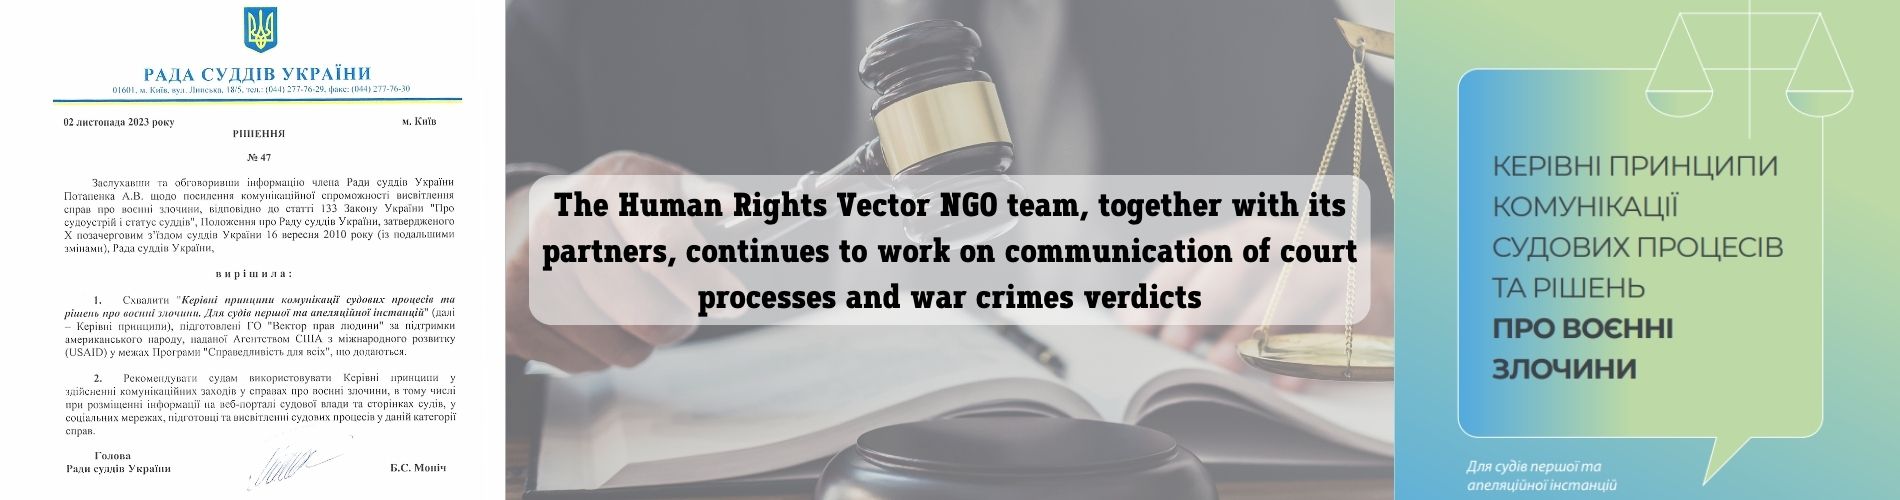 The Human Rights Vector NGO team, together with its partners, continues to work on communication of court processes and war crimes verdicts